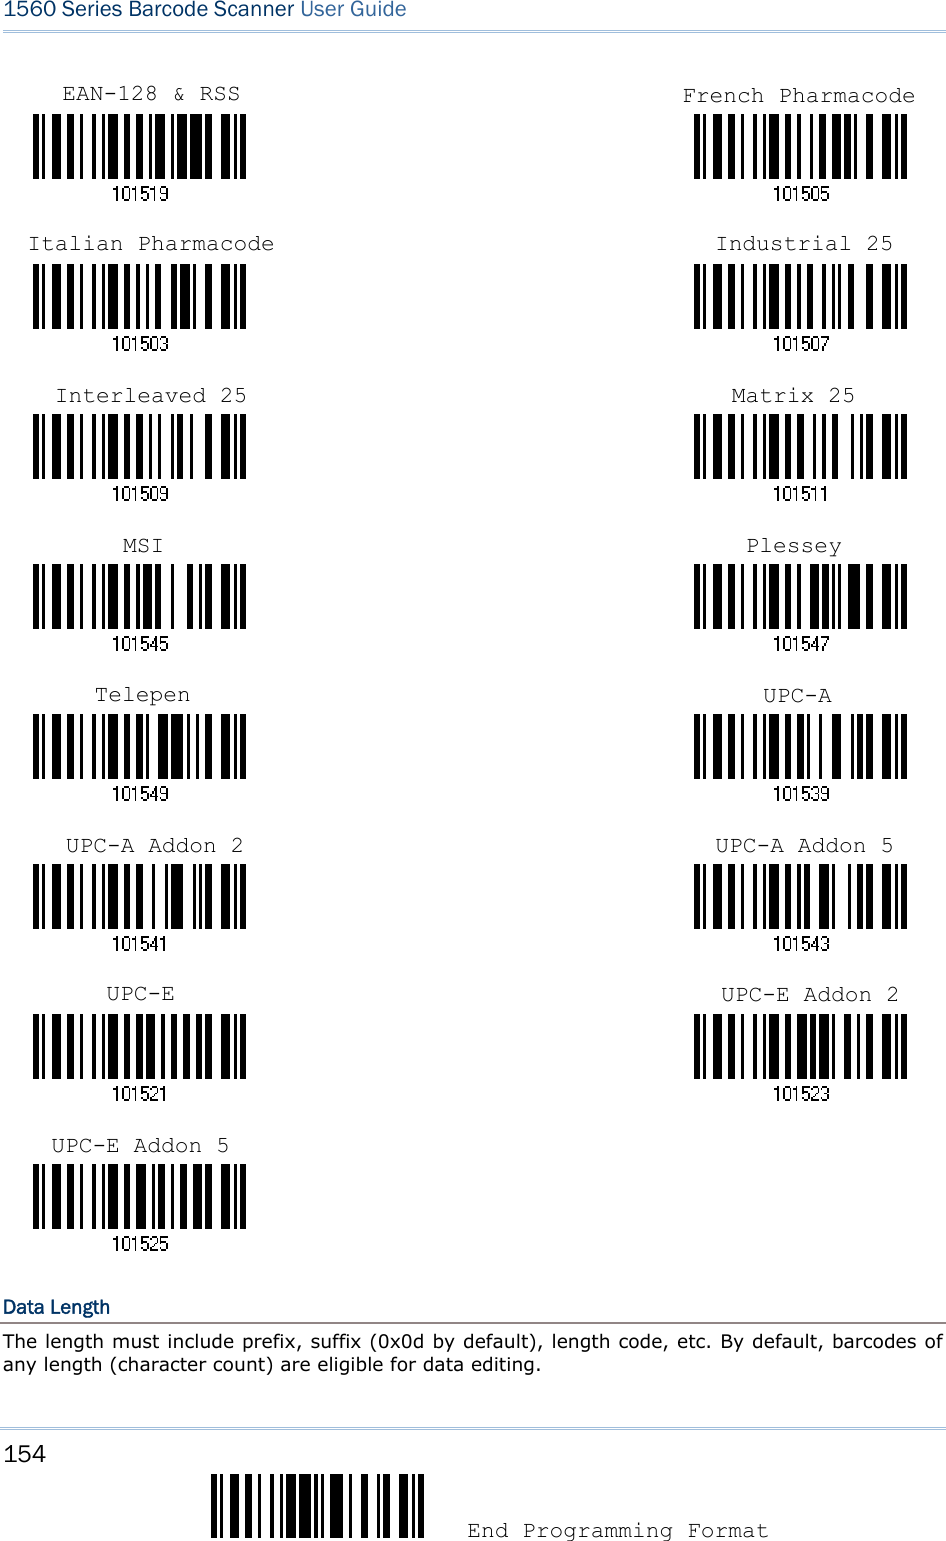 154  End Programming Format 1560 Series Barcode Scanner User Guide                                                                                                                                                                                                                                                                             Data Length The length must include prefix, suffix (0x0d by default), length code, etc. By default, barcodes of any length (character count) are eligible for data editing.  Italian Pharmacode Industrial 25Interleaved 25  Matrix 25 MSI Plessey UPC-A Addon 2 UPC-A Addon 5UPC-E UPC-E Addon 2Telepen  UPC-A  EAN-128 &amp; RSS French PharmacodeUPC-E Addon 5